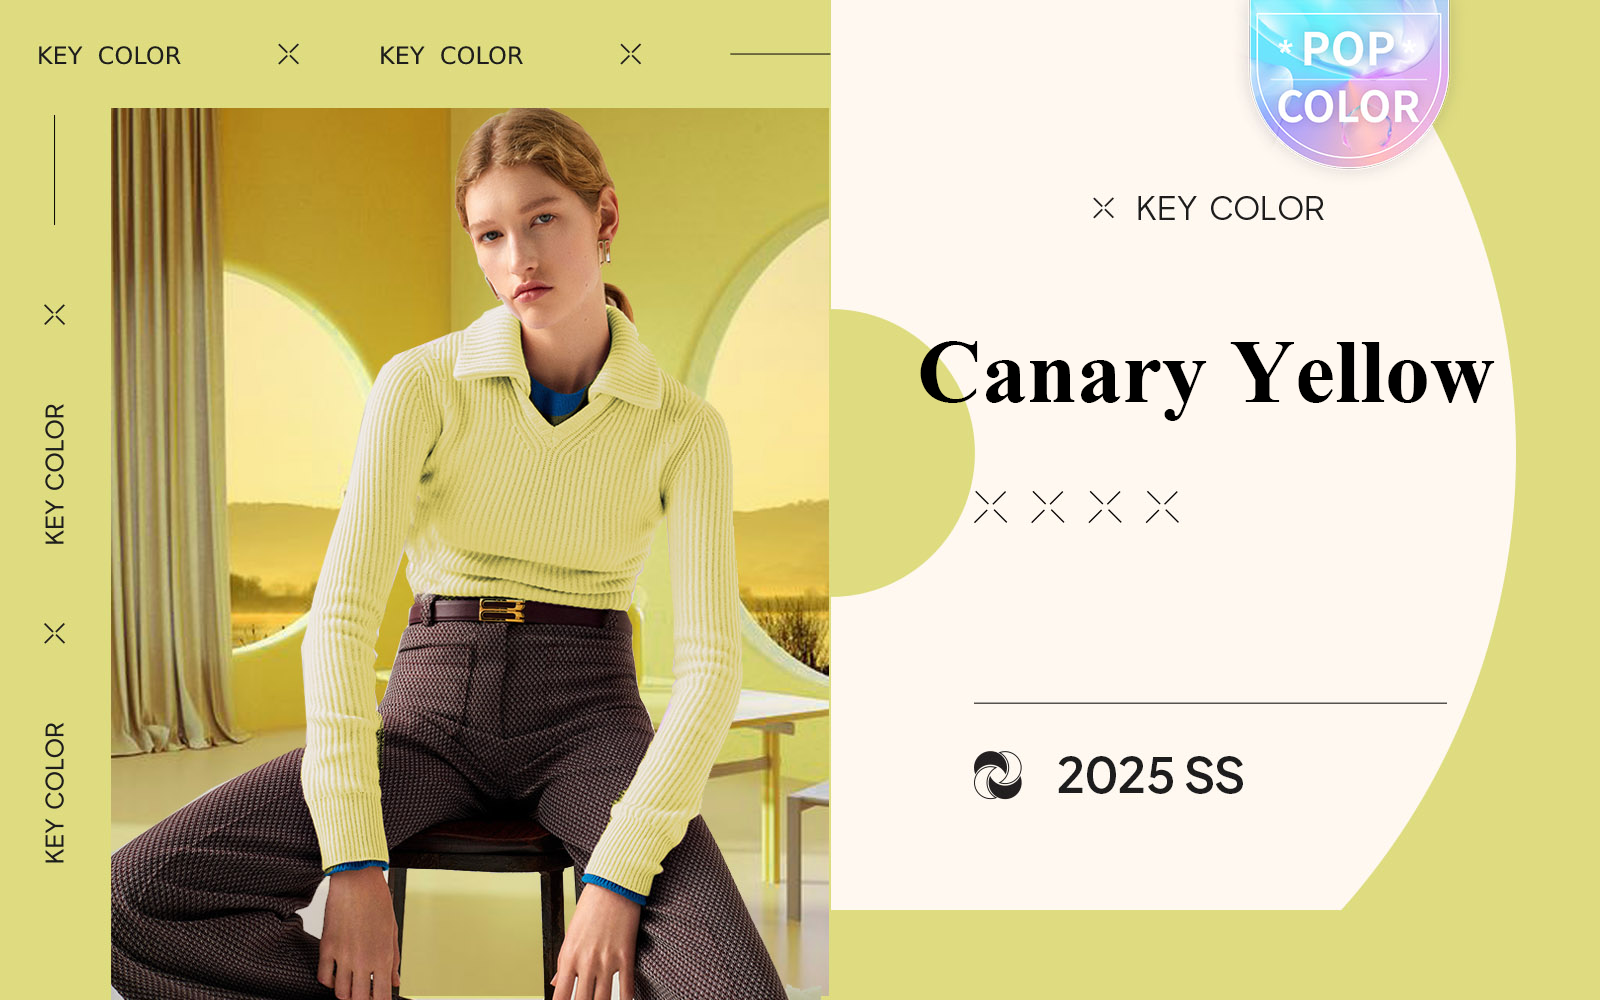 Canary Yellow -- The Color Trend for Women's Knitwear